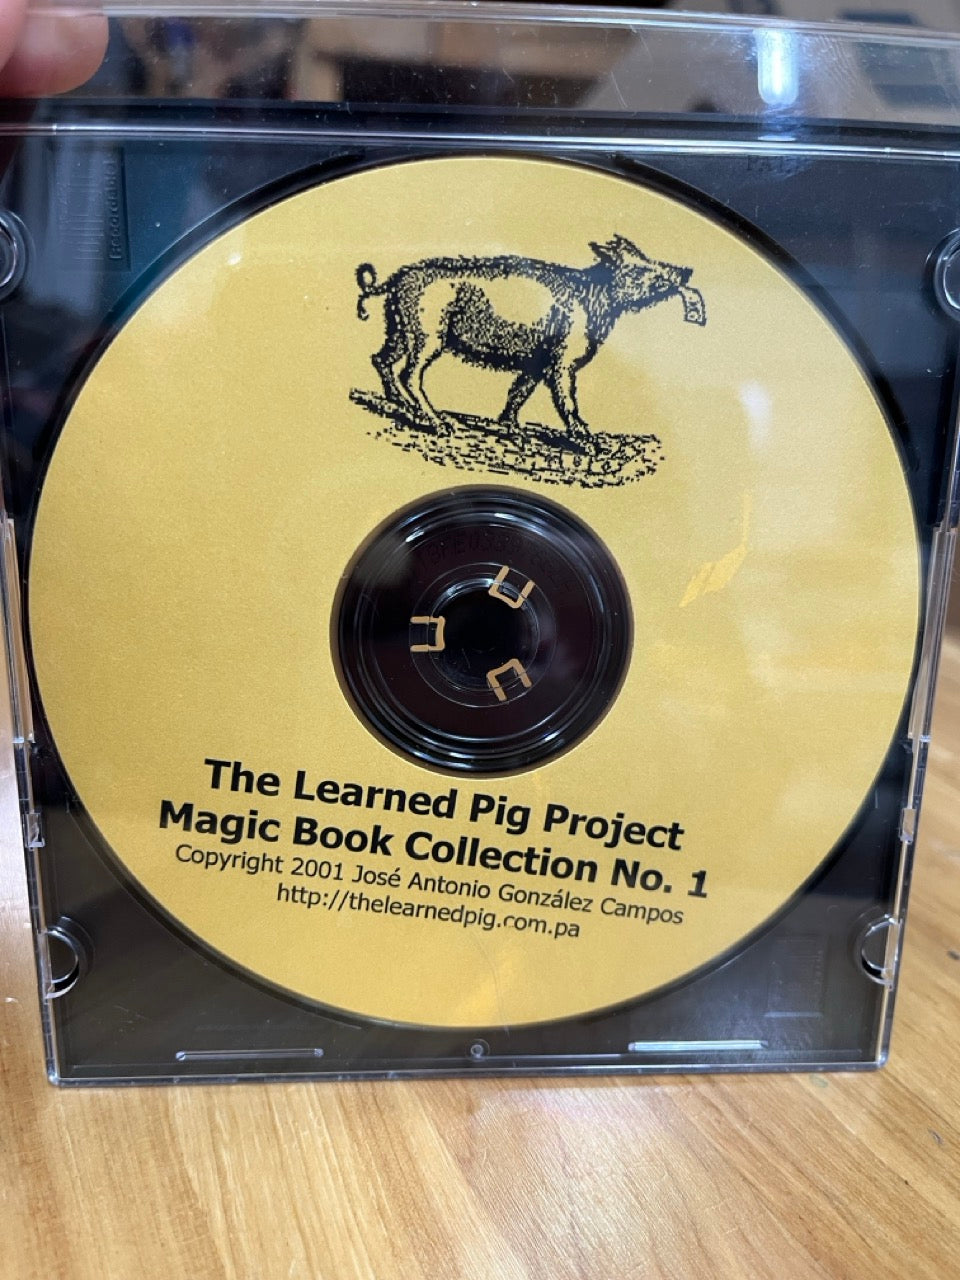 The Learned Pig Project Magic Book Collection #1 - CD-Rom